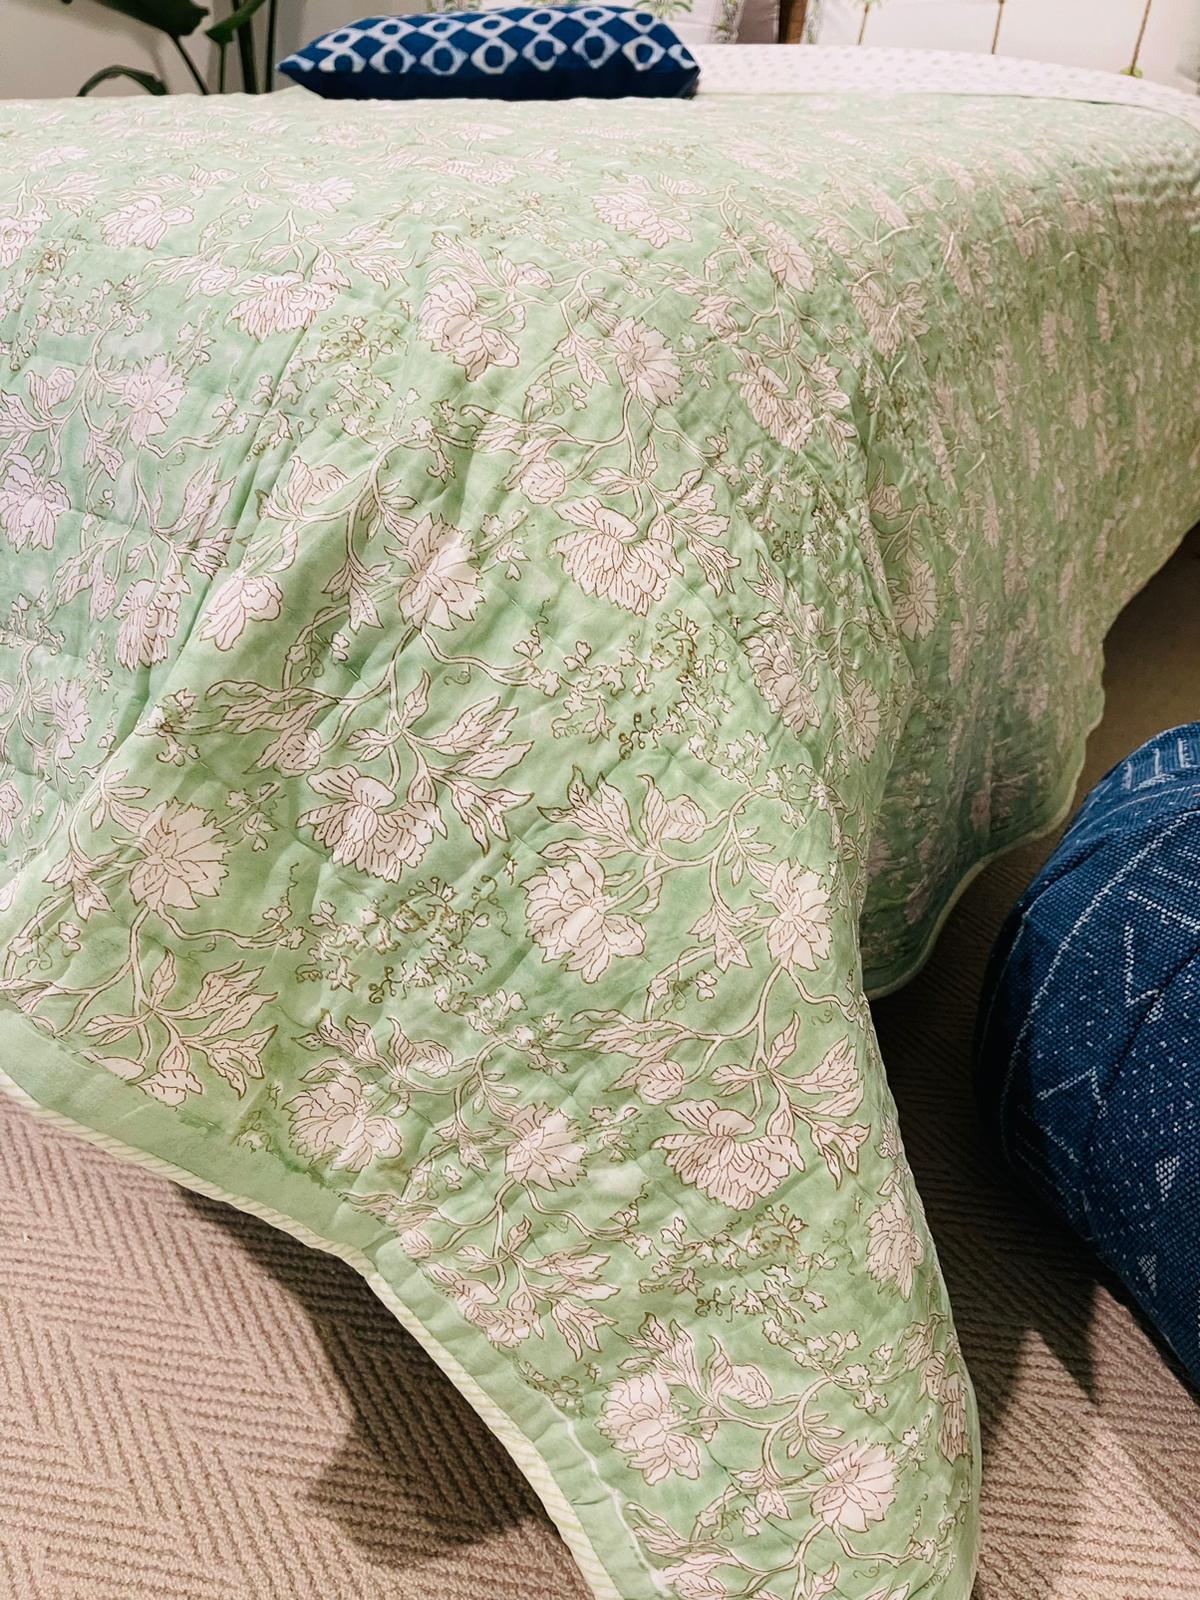 Green Floral Cotton Filled Quilt/Bedspread Hand Block Print - Rooii by Tuvisha